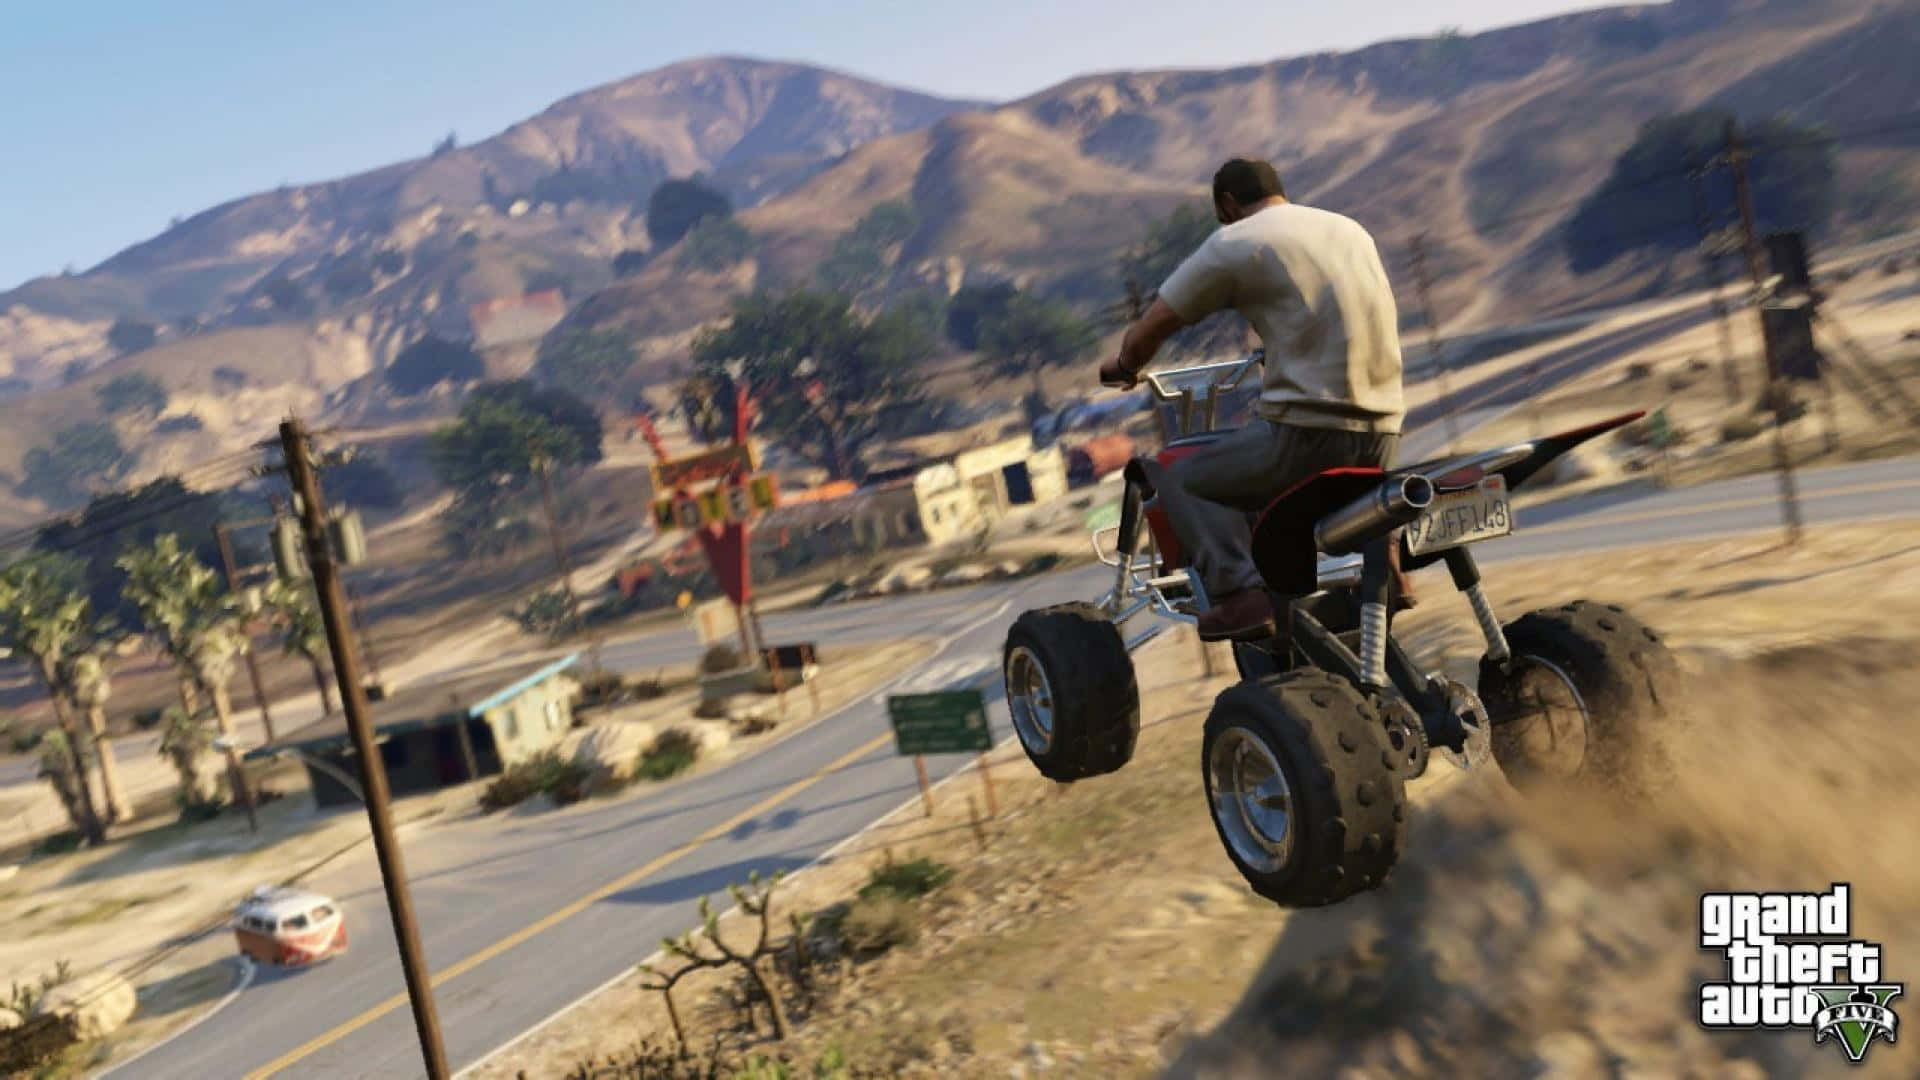 Enhance Your Gaming Experience With Grand Theft Auto V